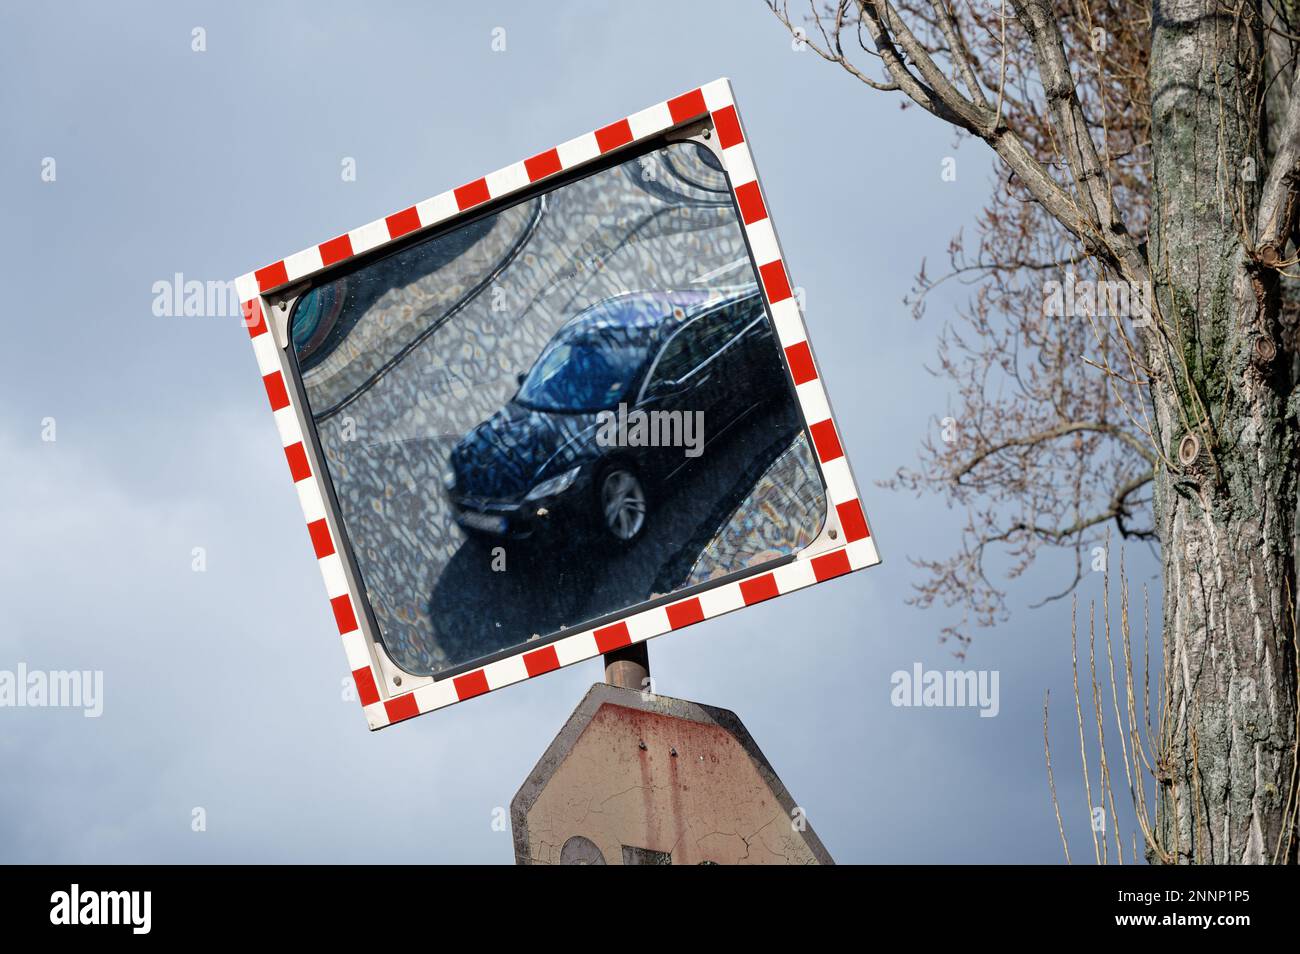 a traffic mirror with red and white border reflects a car on a road Stock Photo